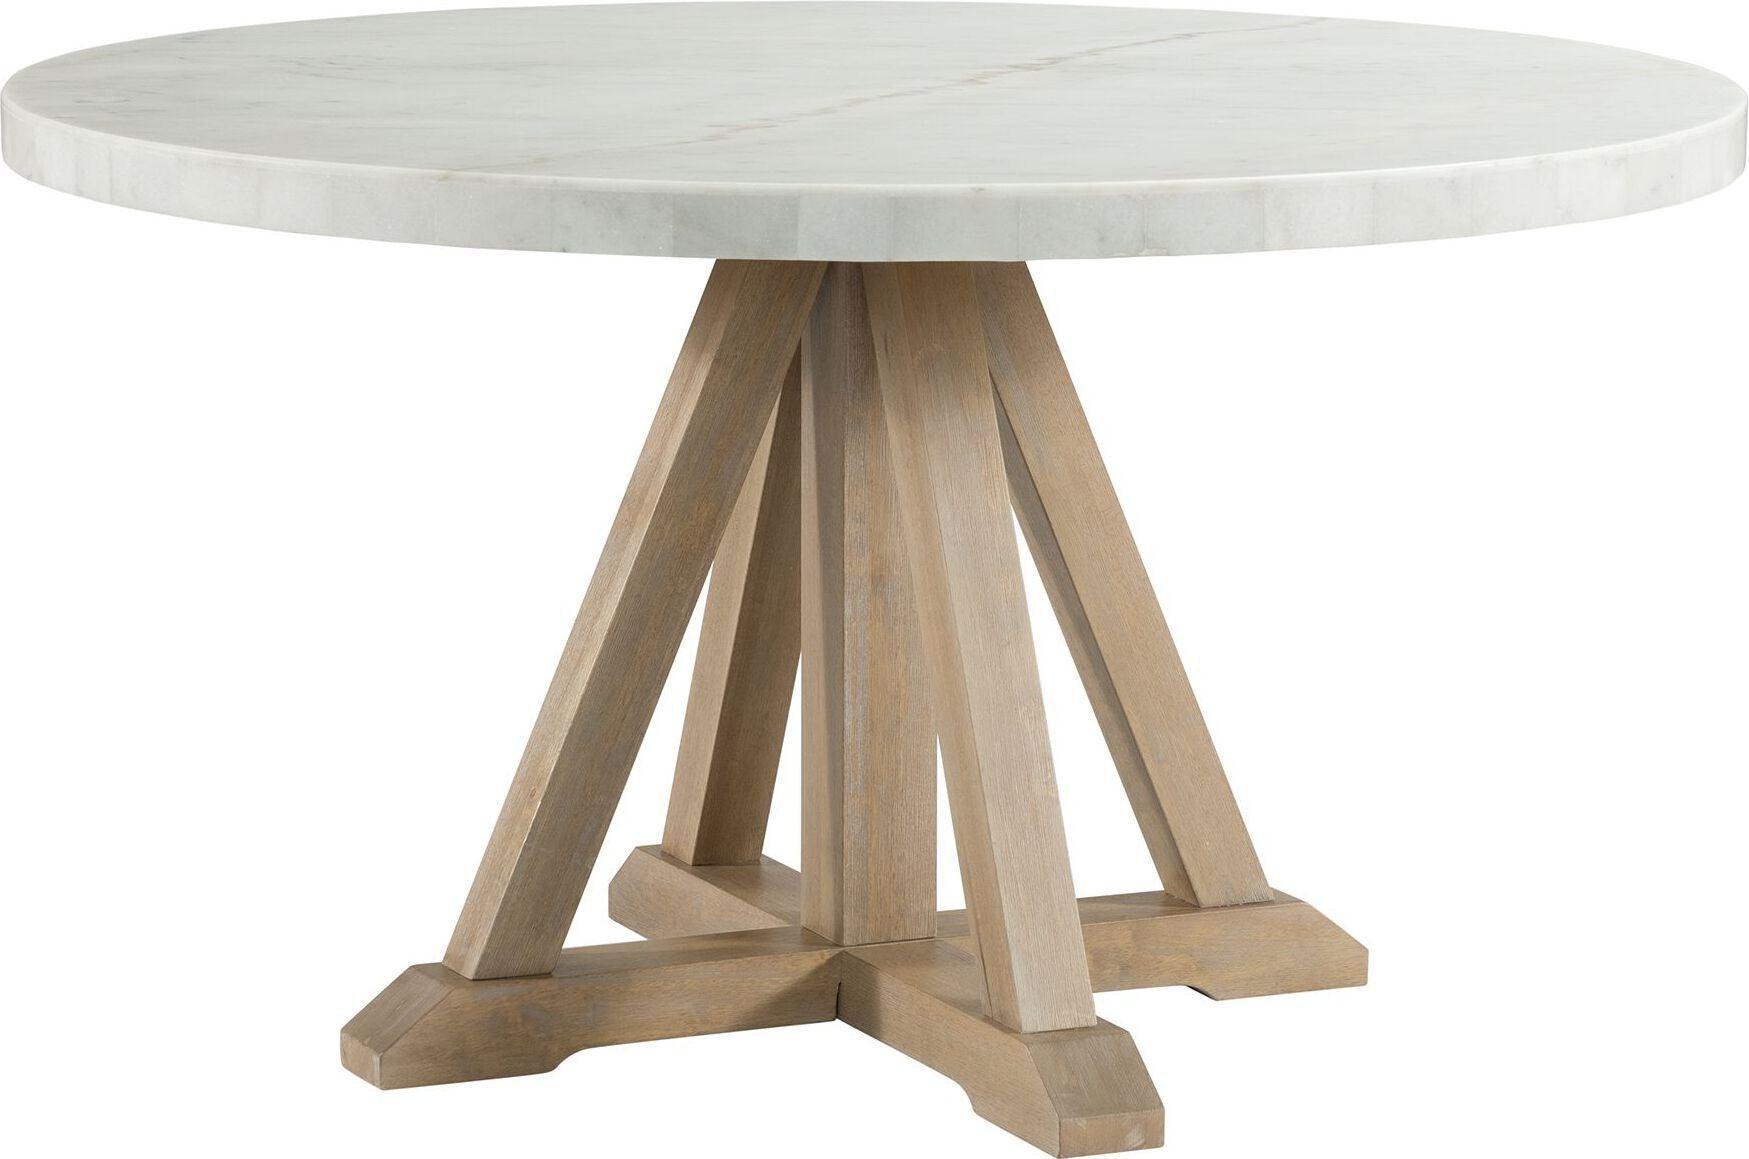 Elements Dining Tables - Liam Round Dining Table